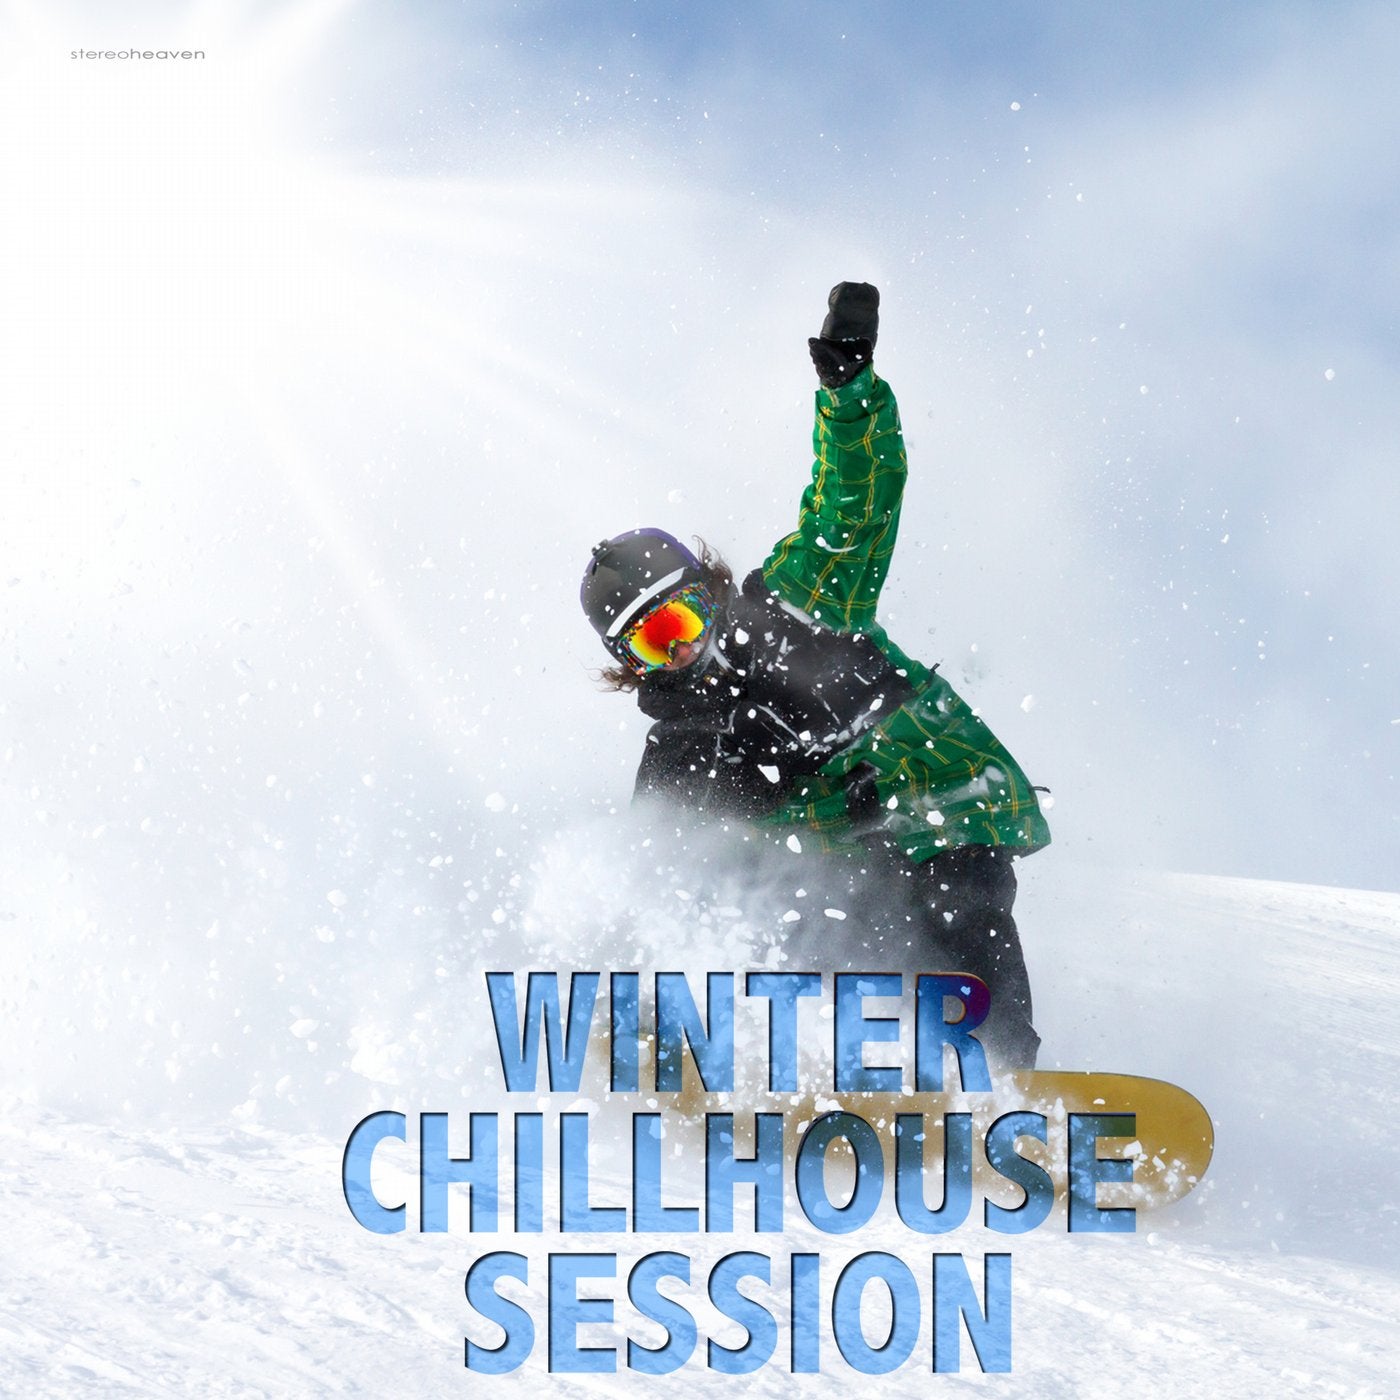 Winter Chillhouse Session